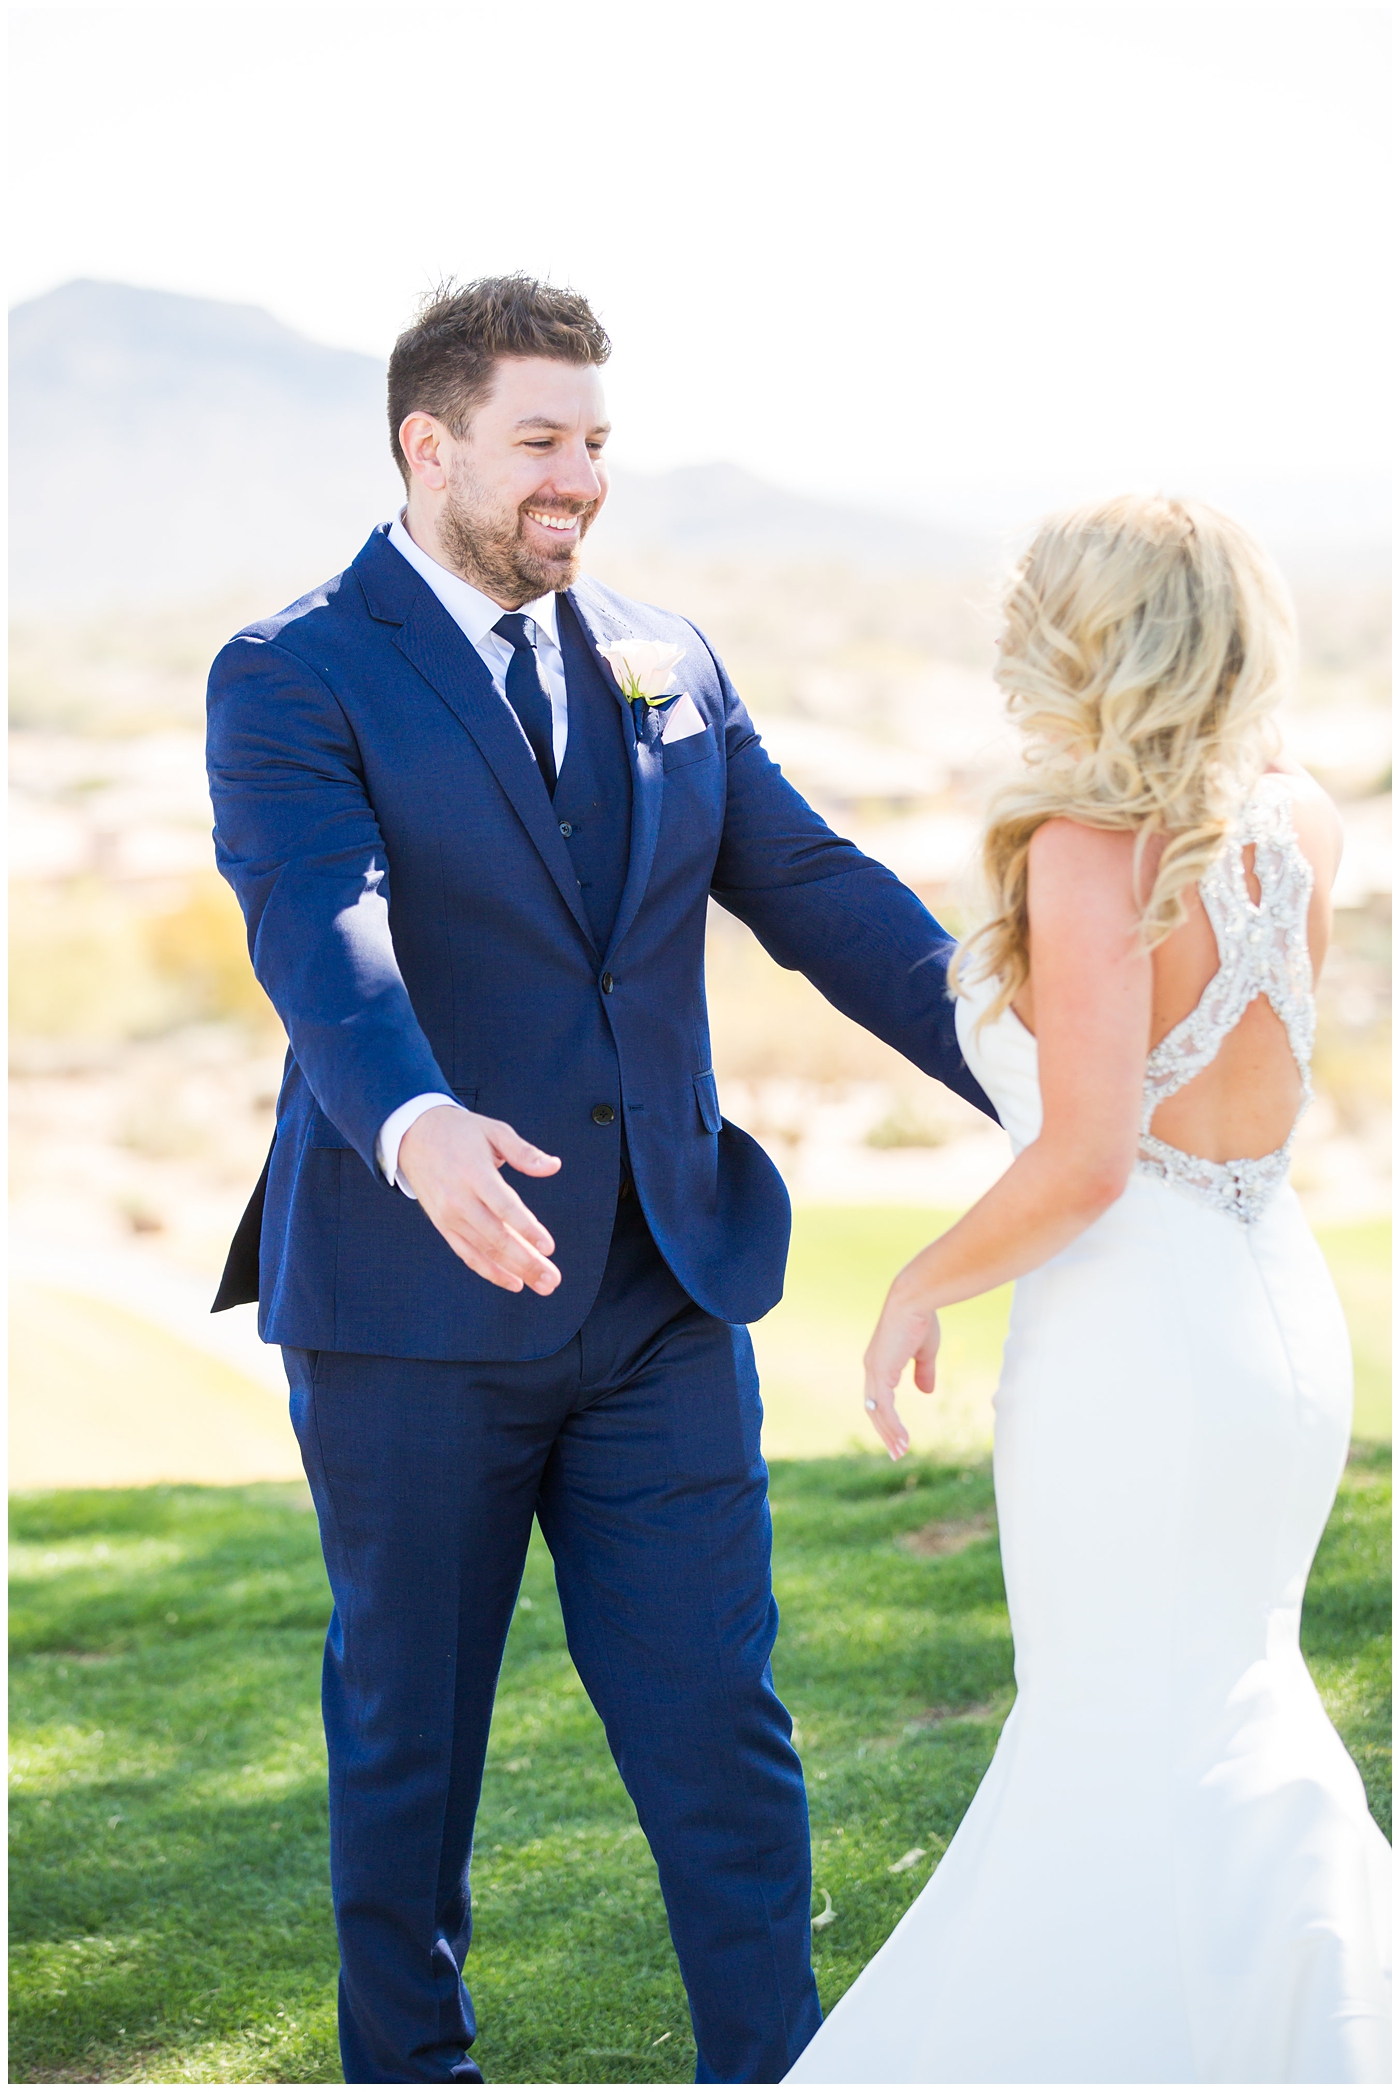 gorgeous bride with side swept hair in racerback pronovias dress with groom in navy suit and tie first look on wedding day